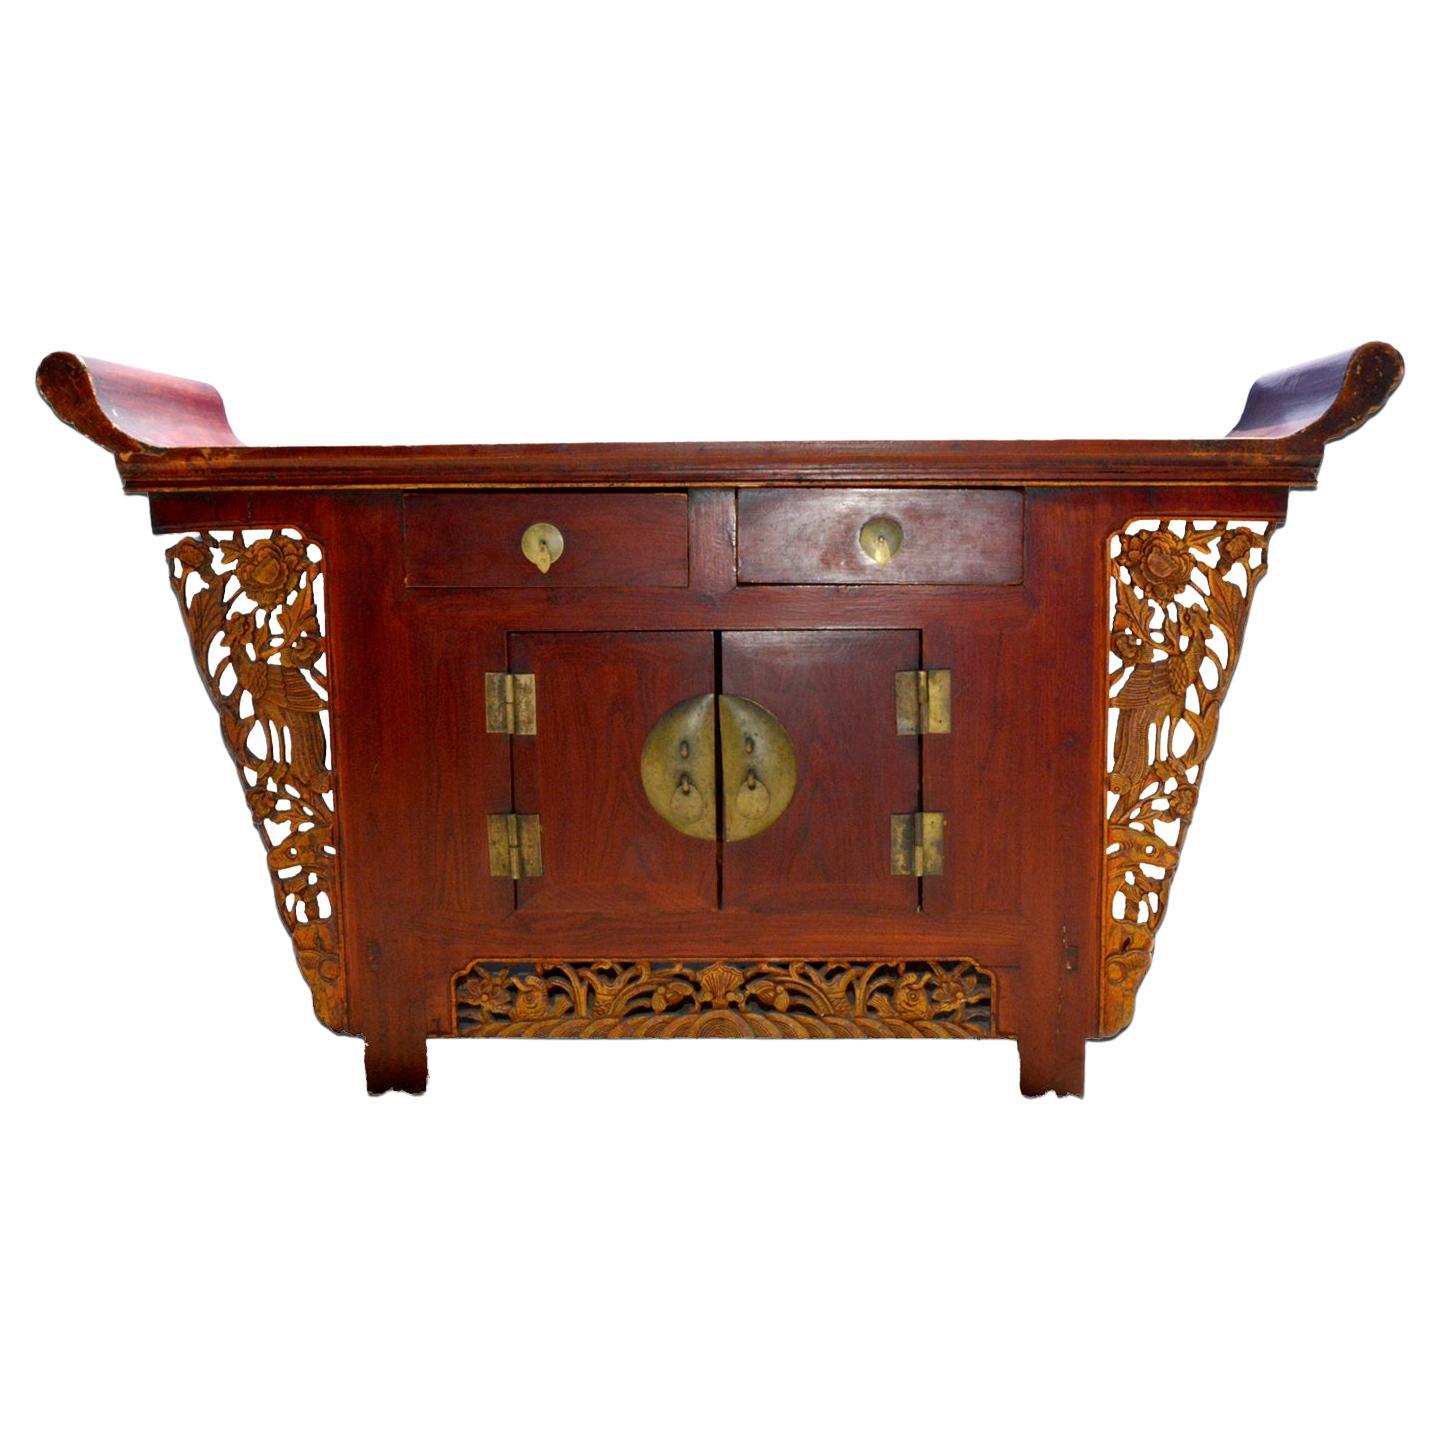 Original Large Antique Chinese Hardwood Red Lacquered Highly Carved Coffer Table For Sale